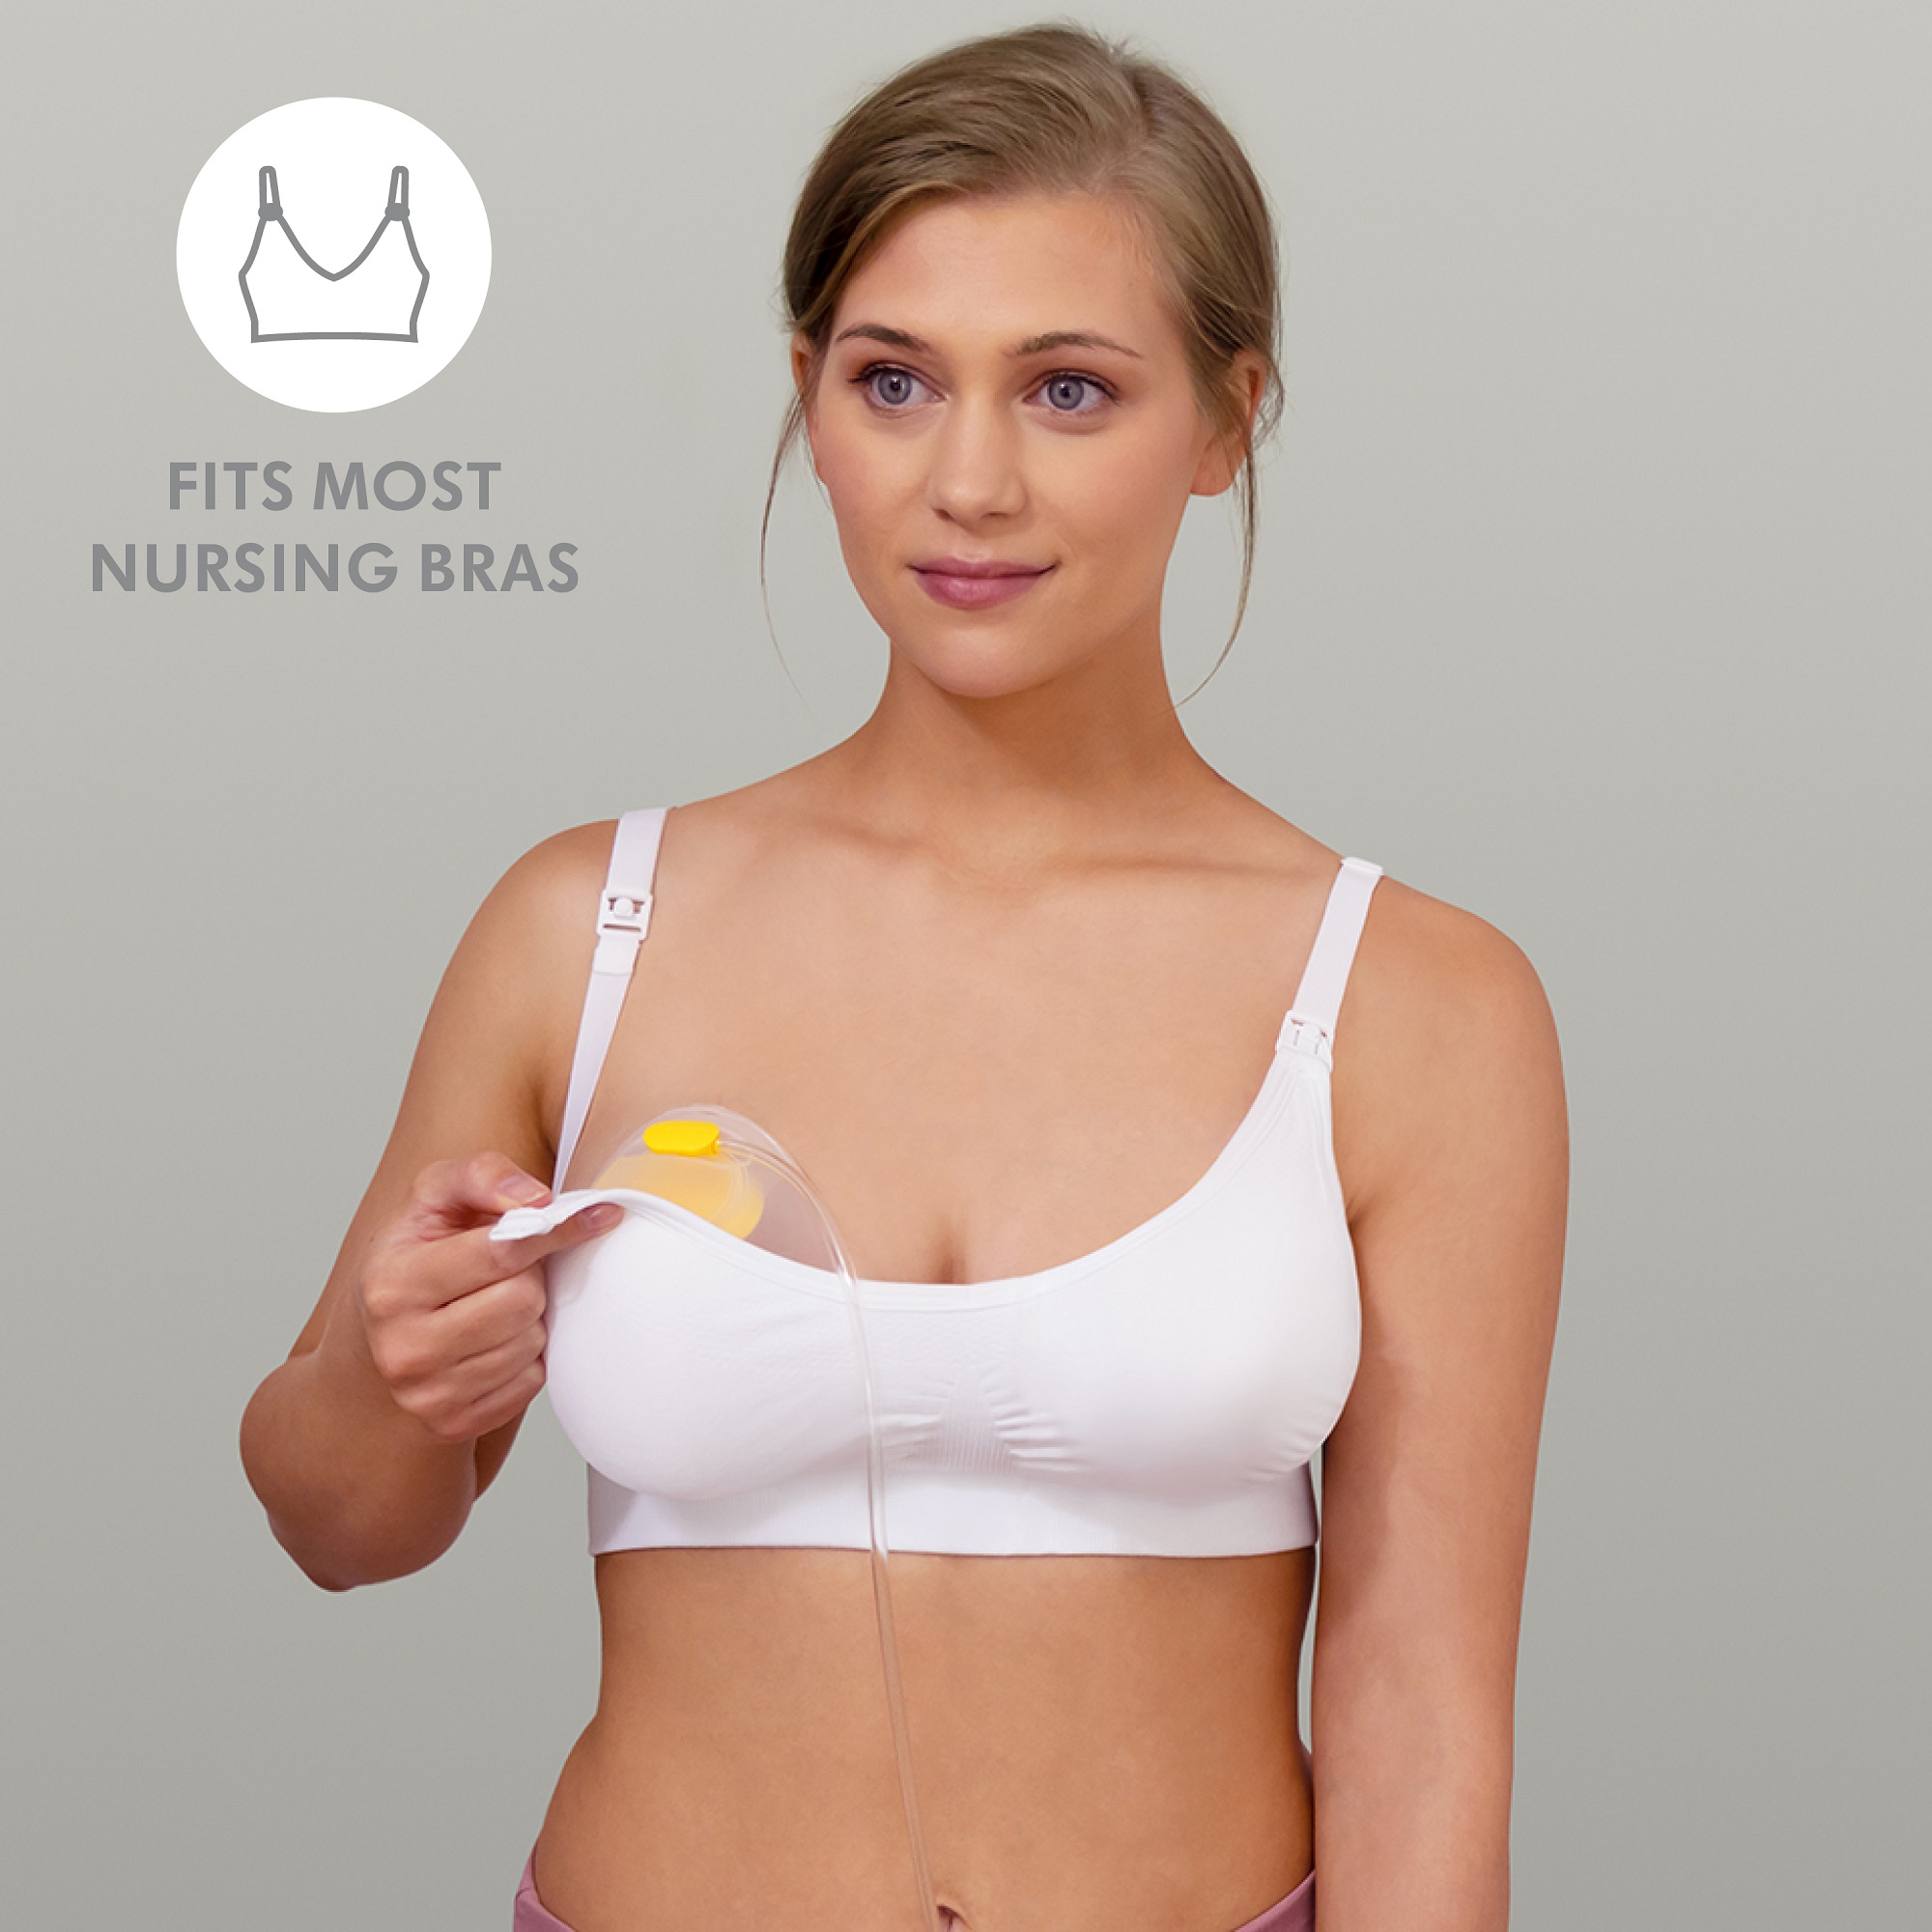 Simple Wishes X-Small/Large, Hands-Free Breast Pump Bra